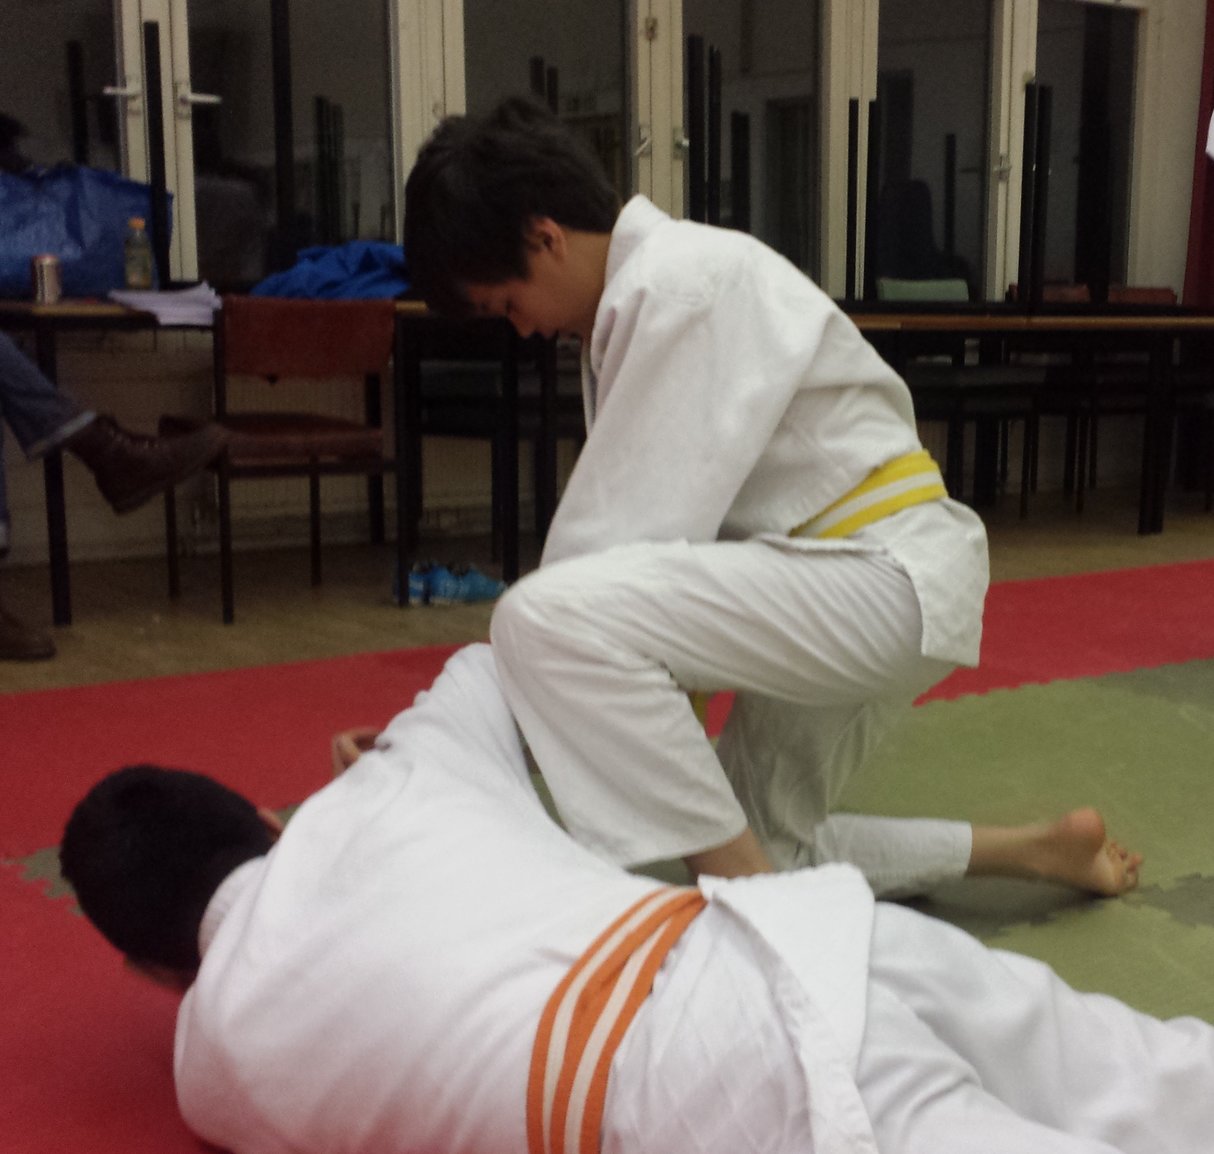 Junior student performing a ground restraint on a downed opponent